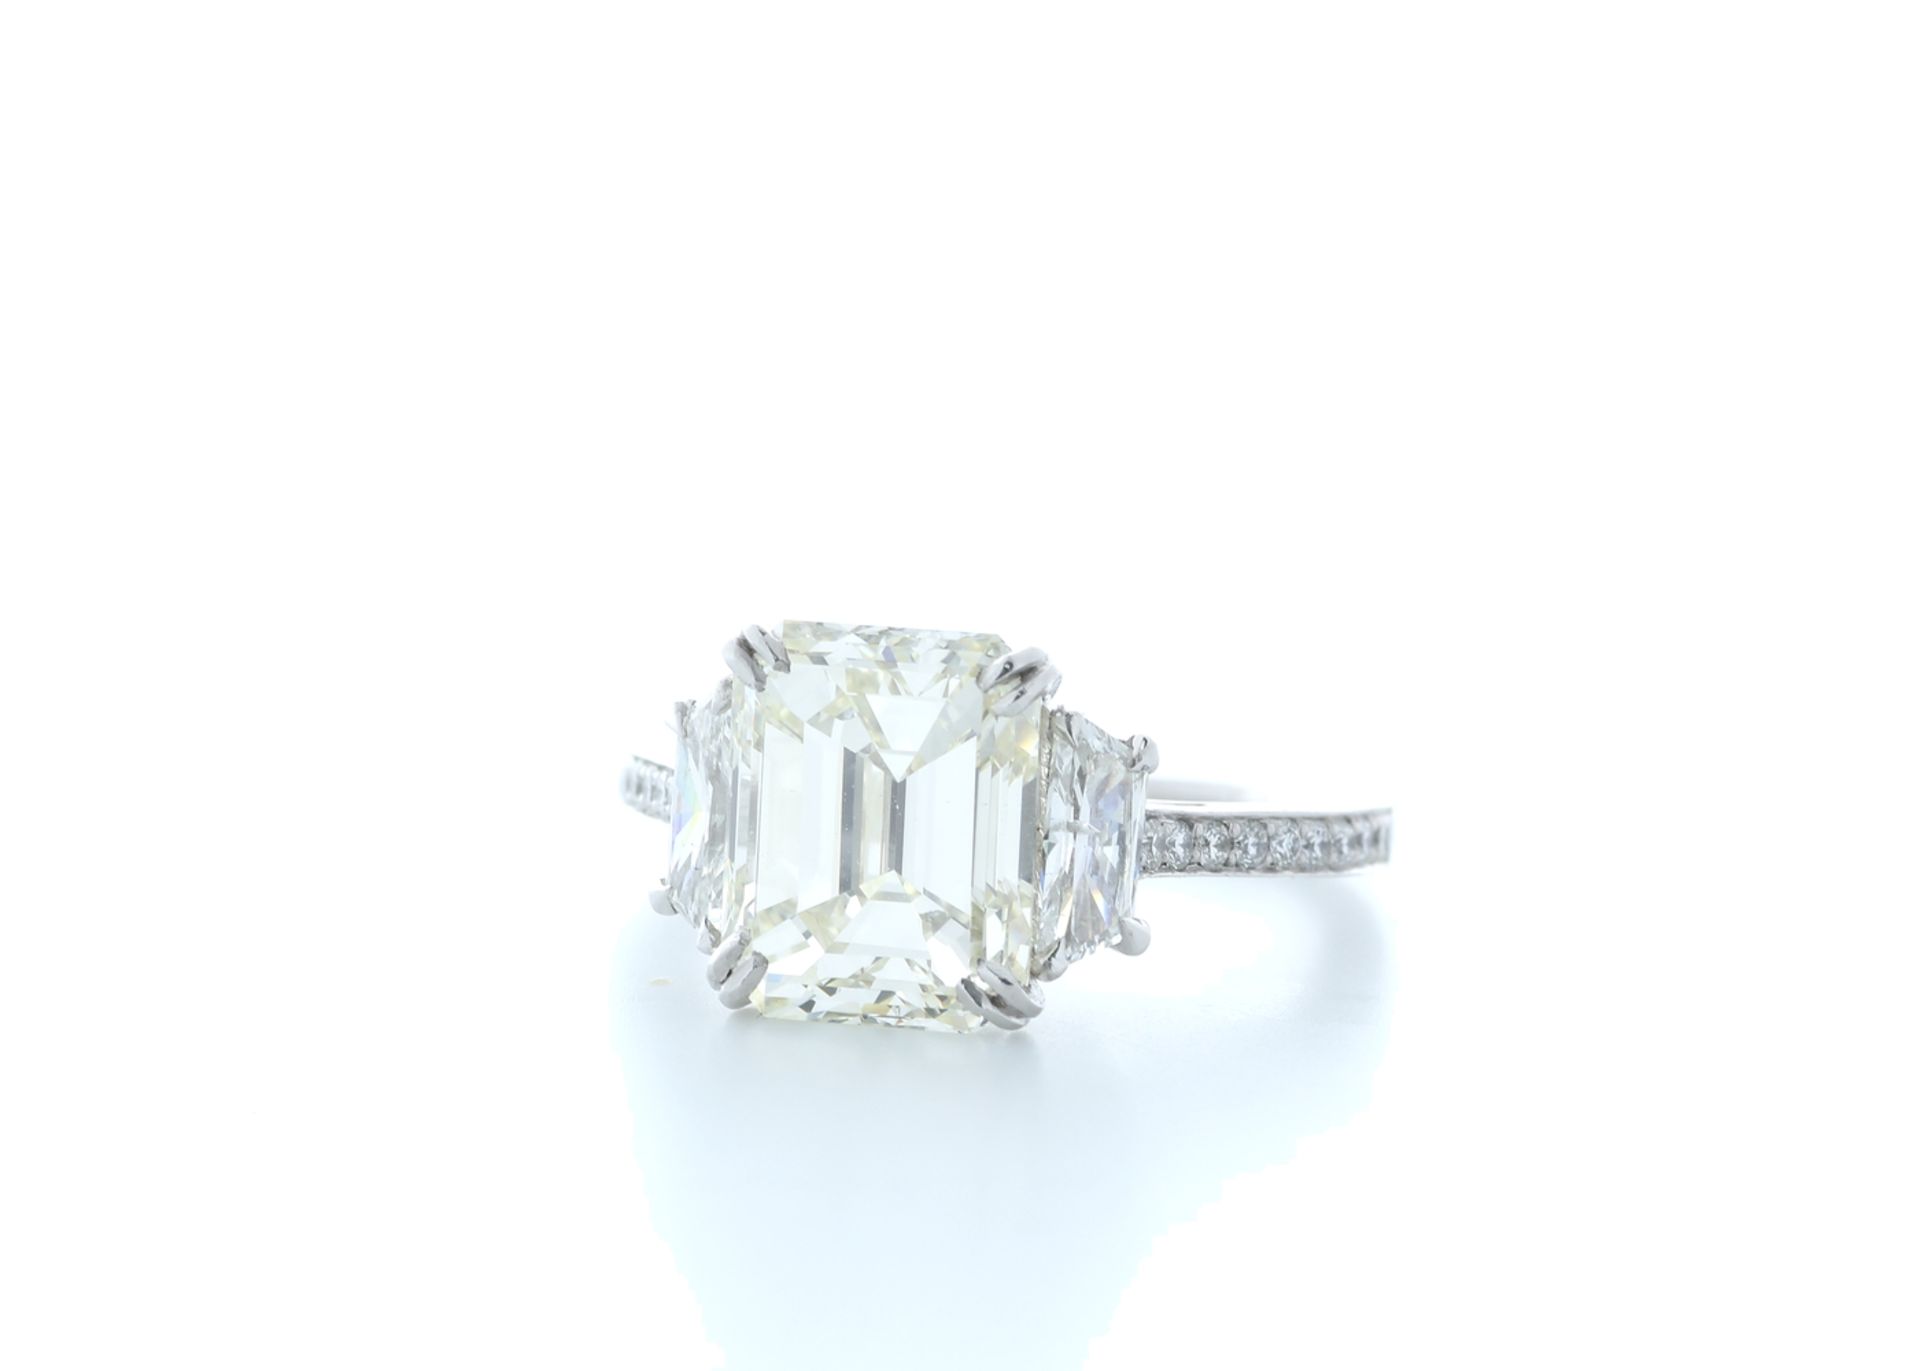 18ct White Gold Emerald Cut Diamond Ring 5.31 (4.56) Carats - Valued by IDI £190,000.00 - 18ct White - Image 2 of 5